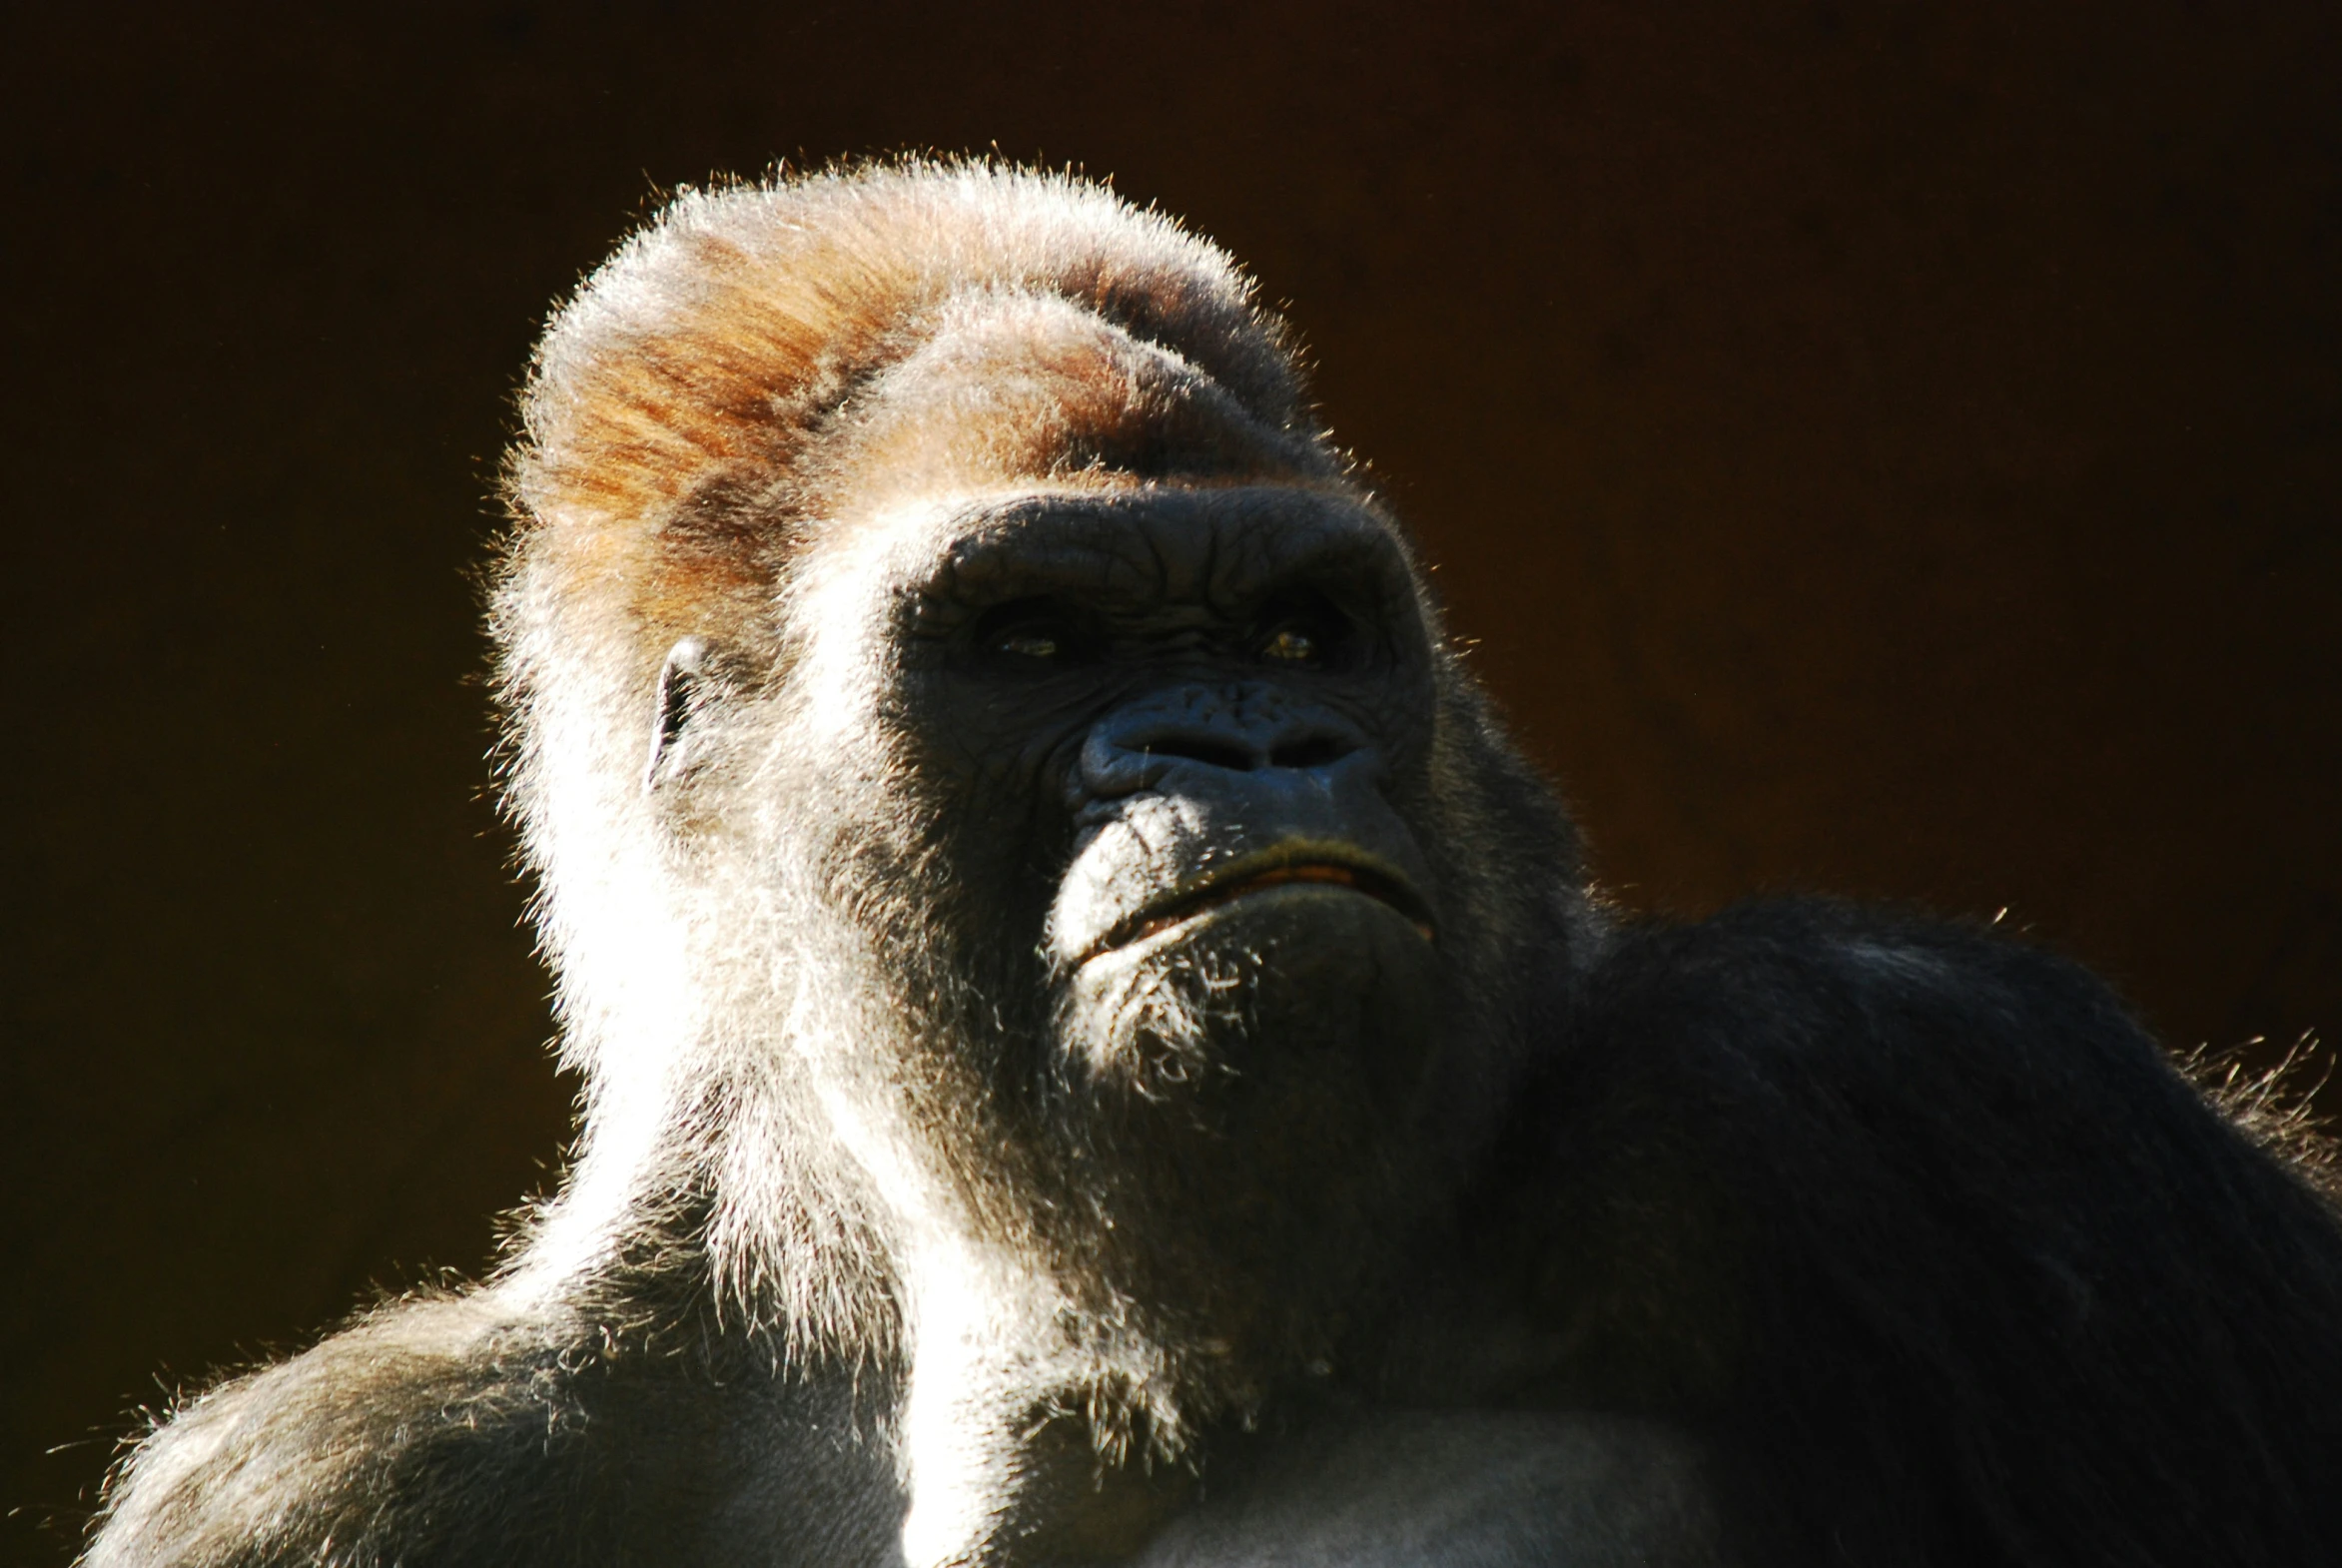 a close - up s of a gorilla's head with the sun shining on him